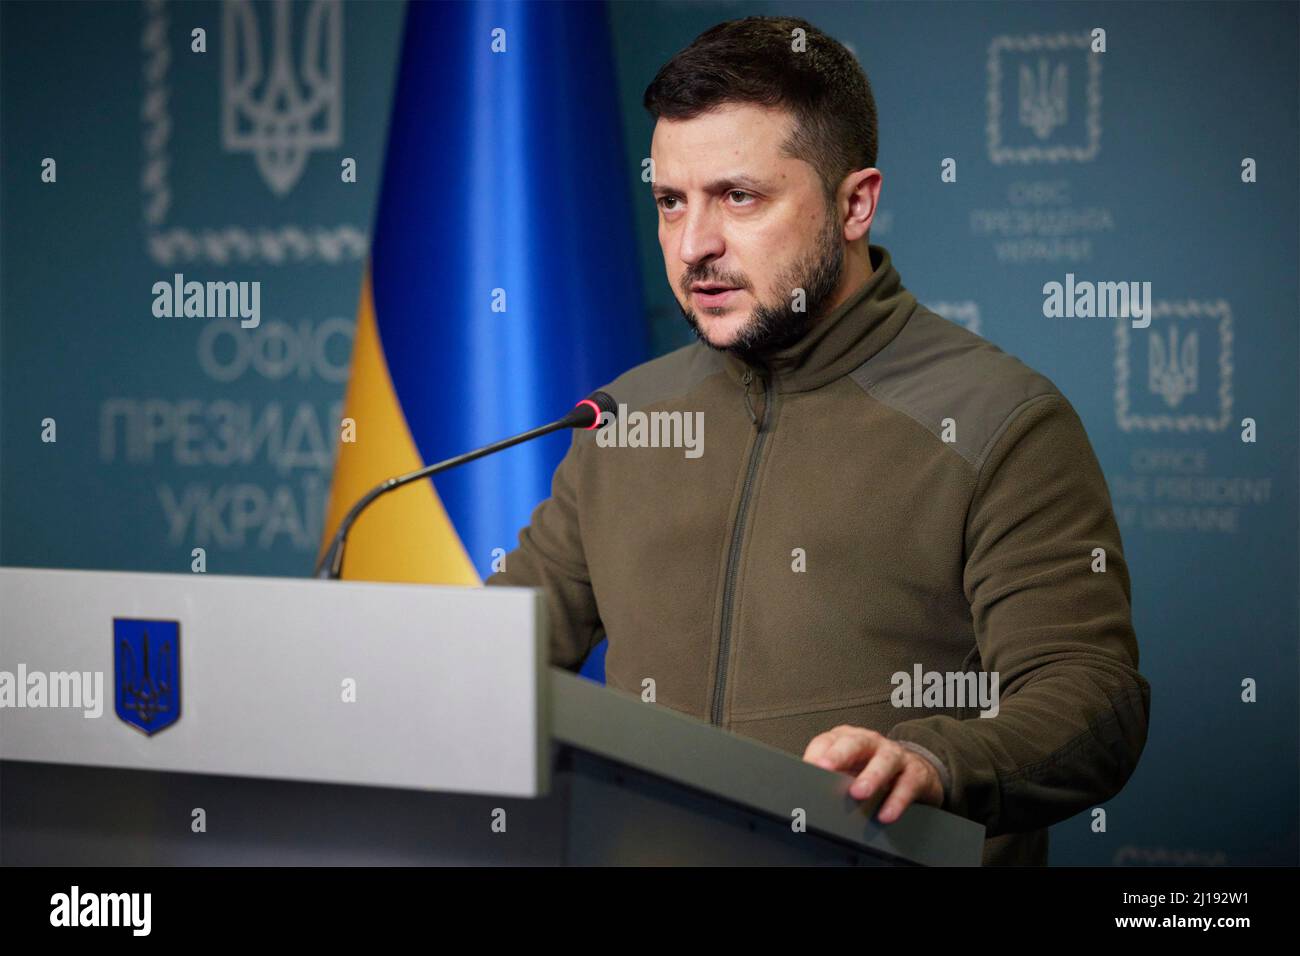 Kyiv, Ukraine. 22 March, 2022. Ukrainian President Volodymyr Zelenskyy updates the people of Ukraine after speaking with Pope Francis and addressing the Italian parliament, March 22, 2022 in Kyiv, Ukraine. Stock Photo